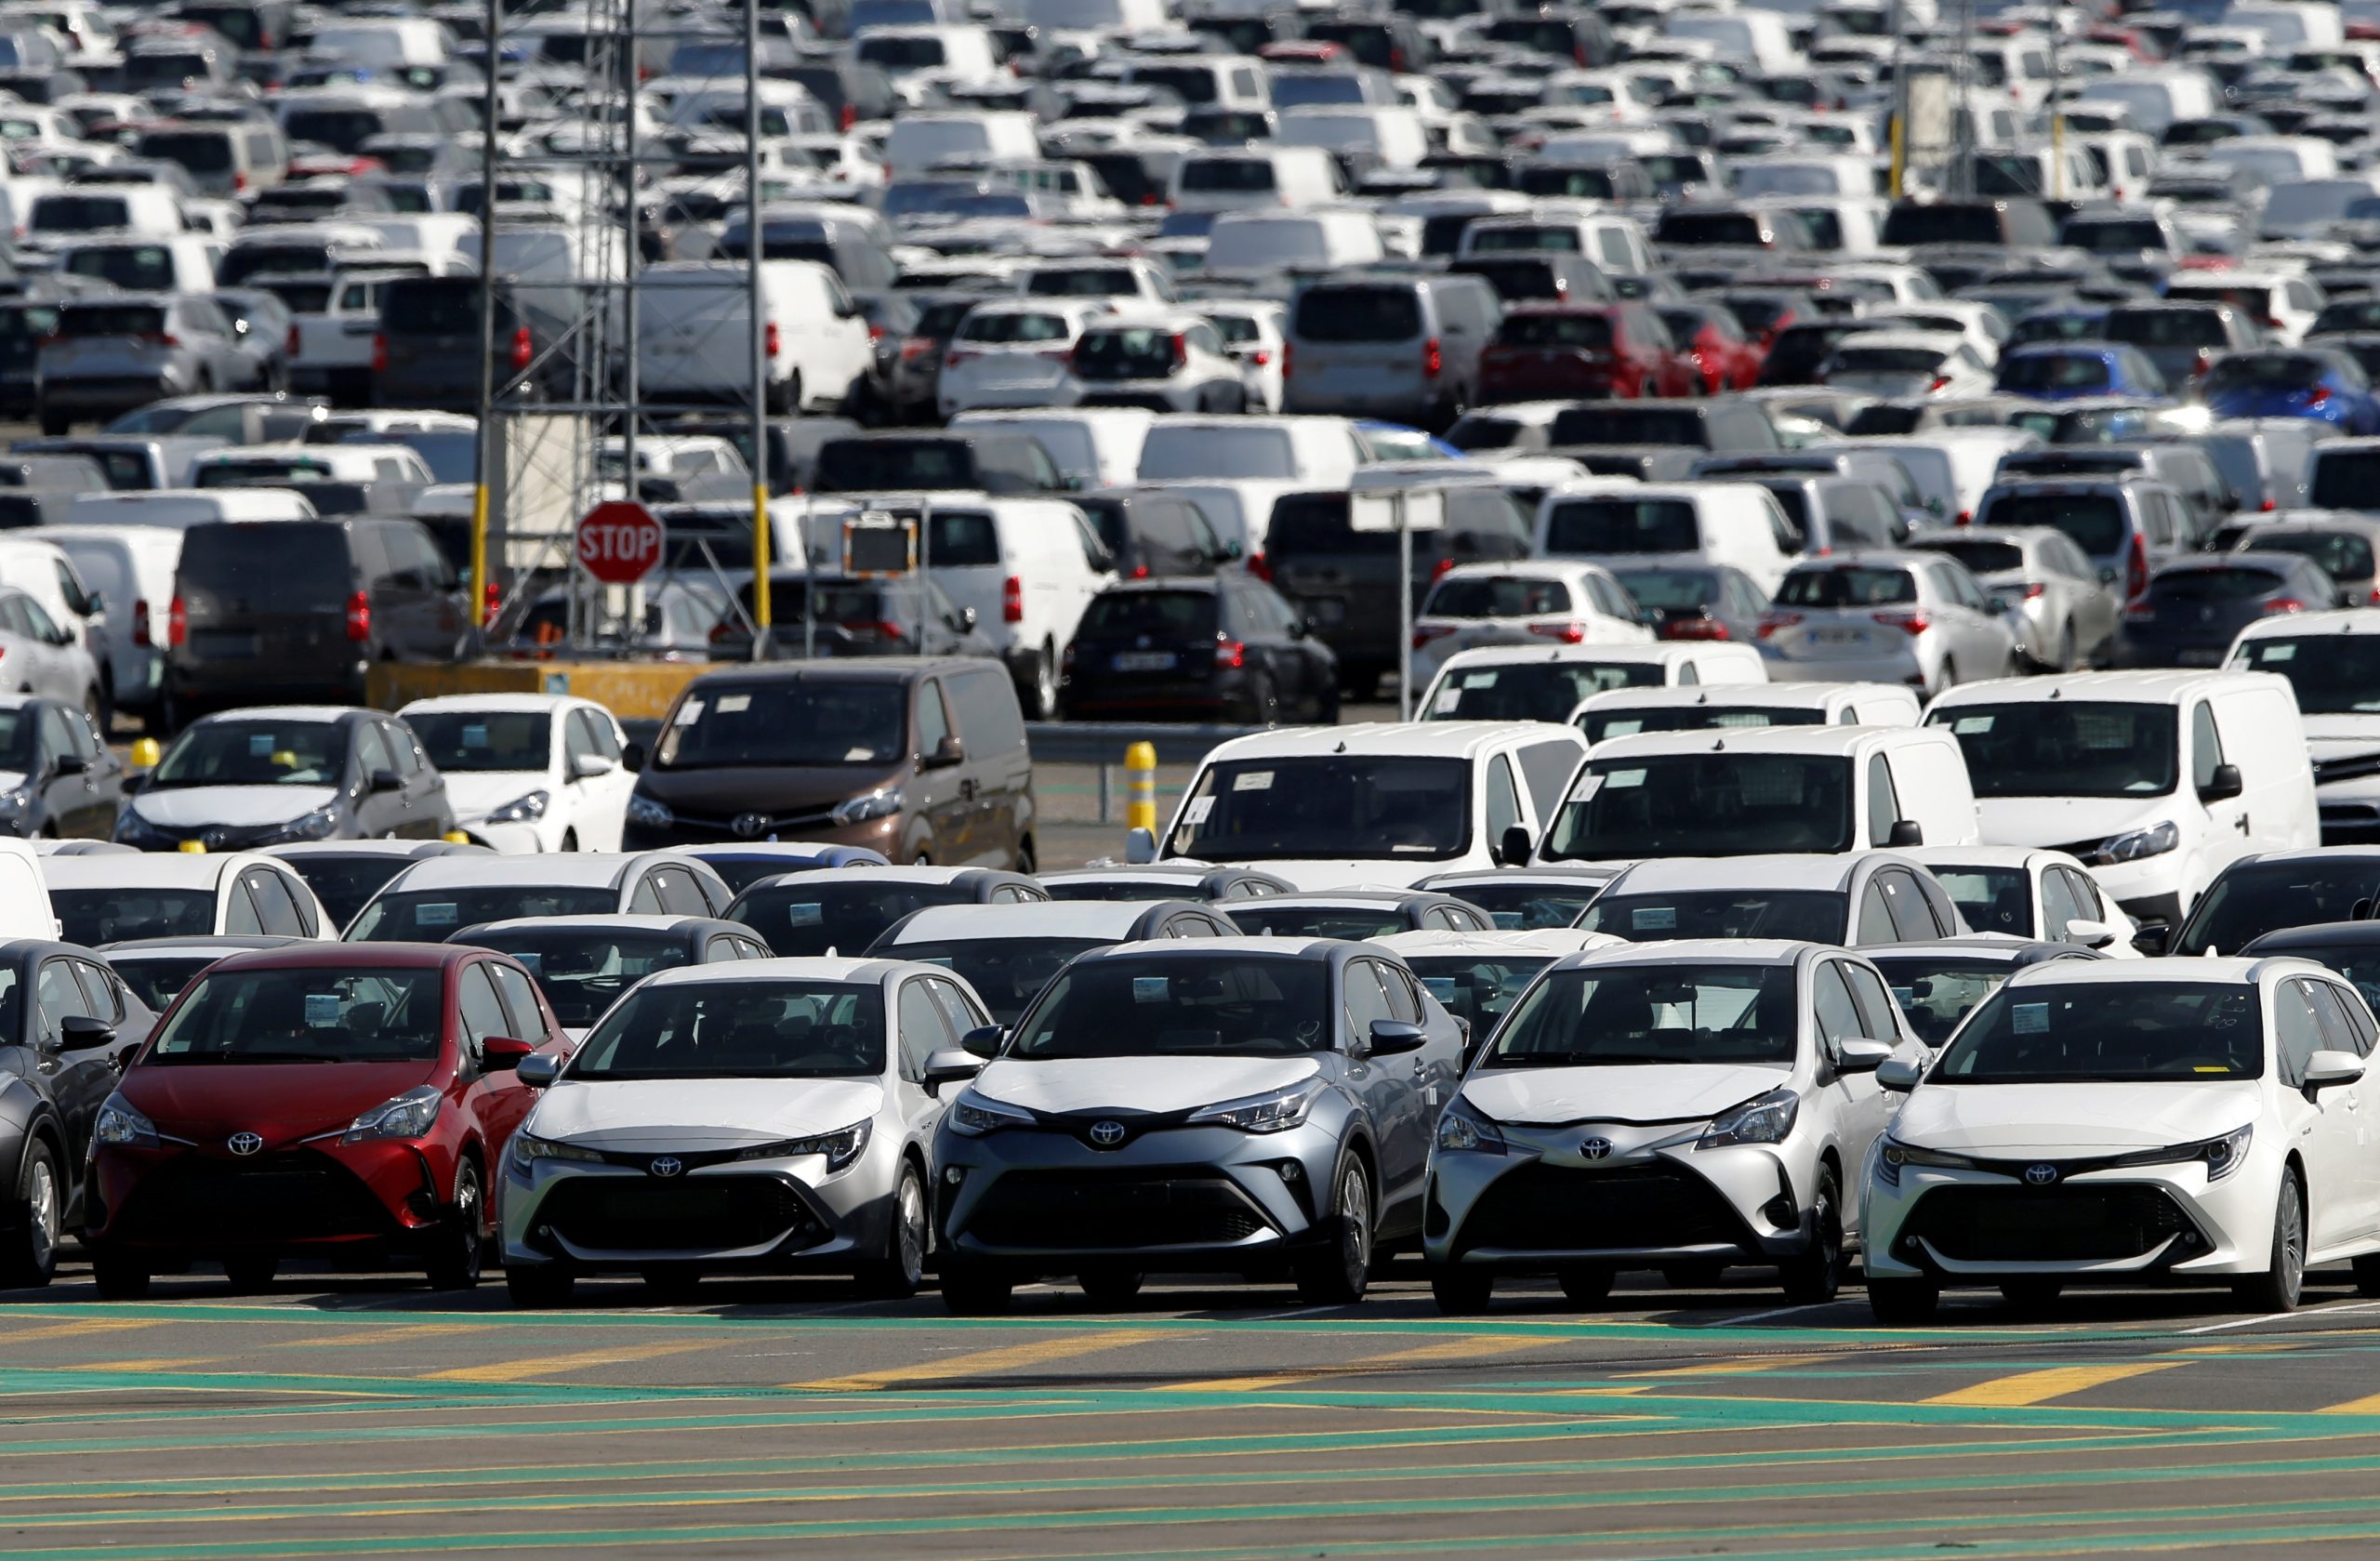 FILE PHOTO: Toyota Motor Manufacturing France resumes operations after five week closure amid the coronavirus disease (COVID-19) outbreak FILE PHOTO: New cars are seen parked at the Toyota Motor Manufacturing France plant as it resumes its operations after five weeks of closure during a lockdown amid the coronavirus disease (COVID-19) outbreak, in Onnaing, France, April 21, 2020.   REUTERS/Pascal Rossignol/File Photo  GLOBAL BUSINESS WEEK AHEAD Pascal Rossignol